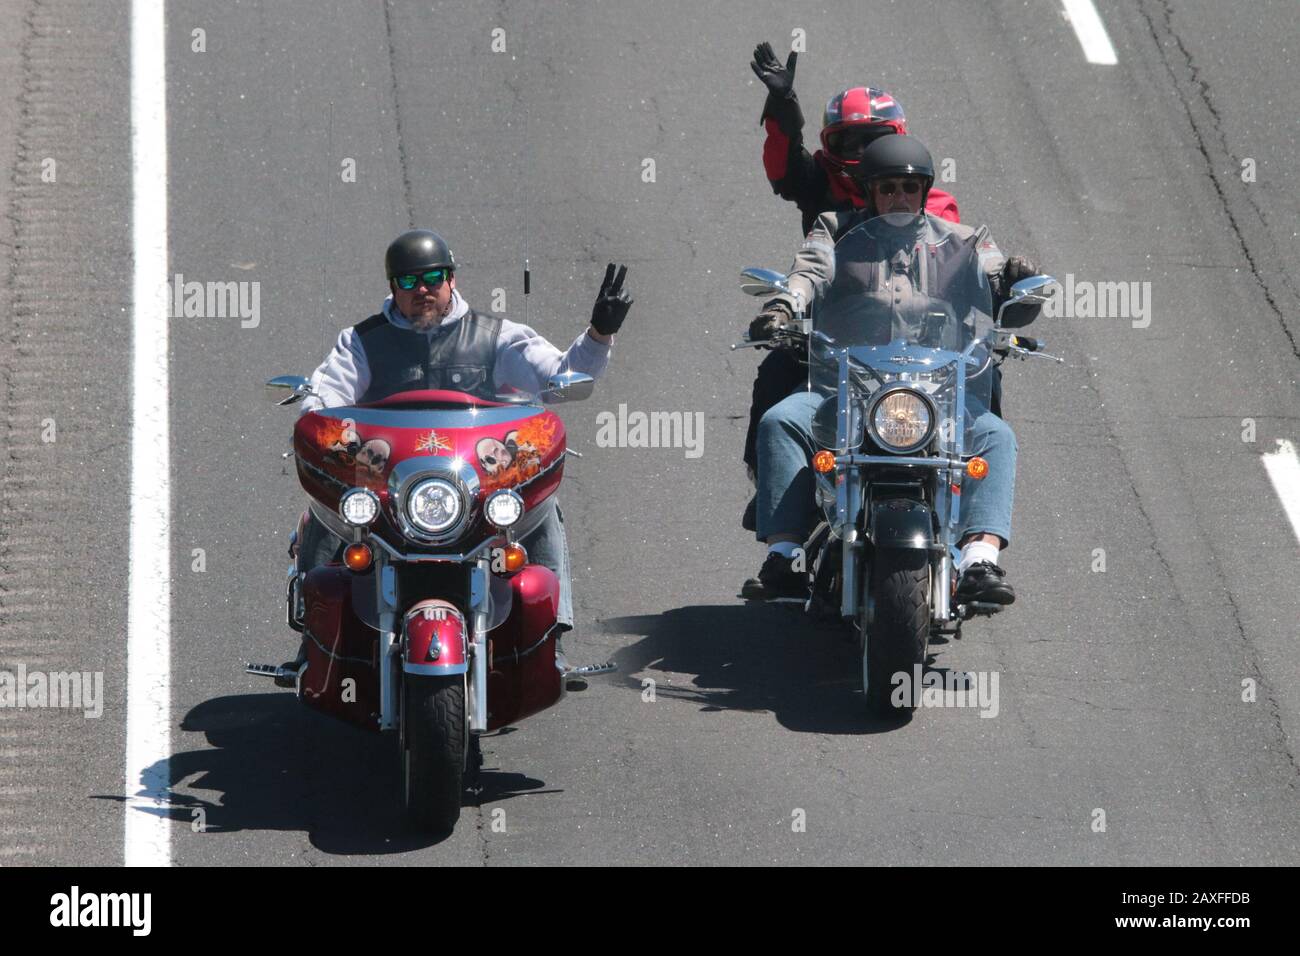 Motorcycle event Ride for Fallen Heroes Stock Photo